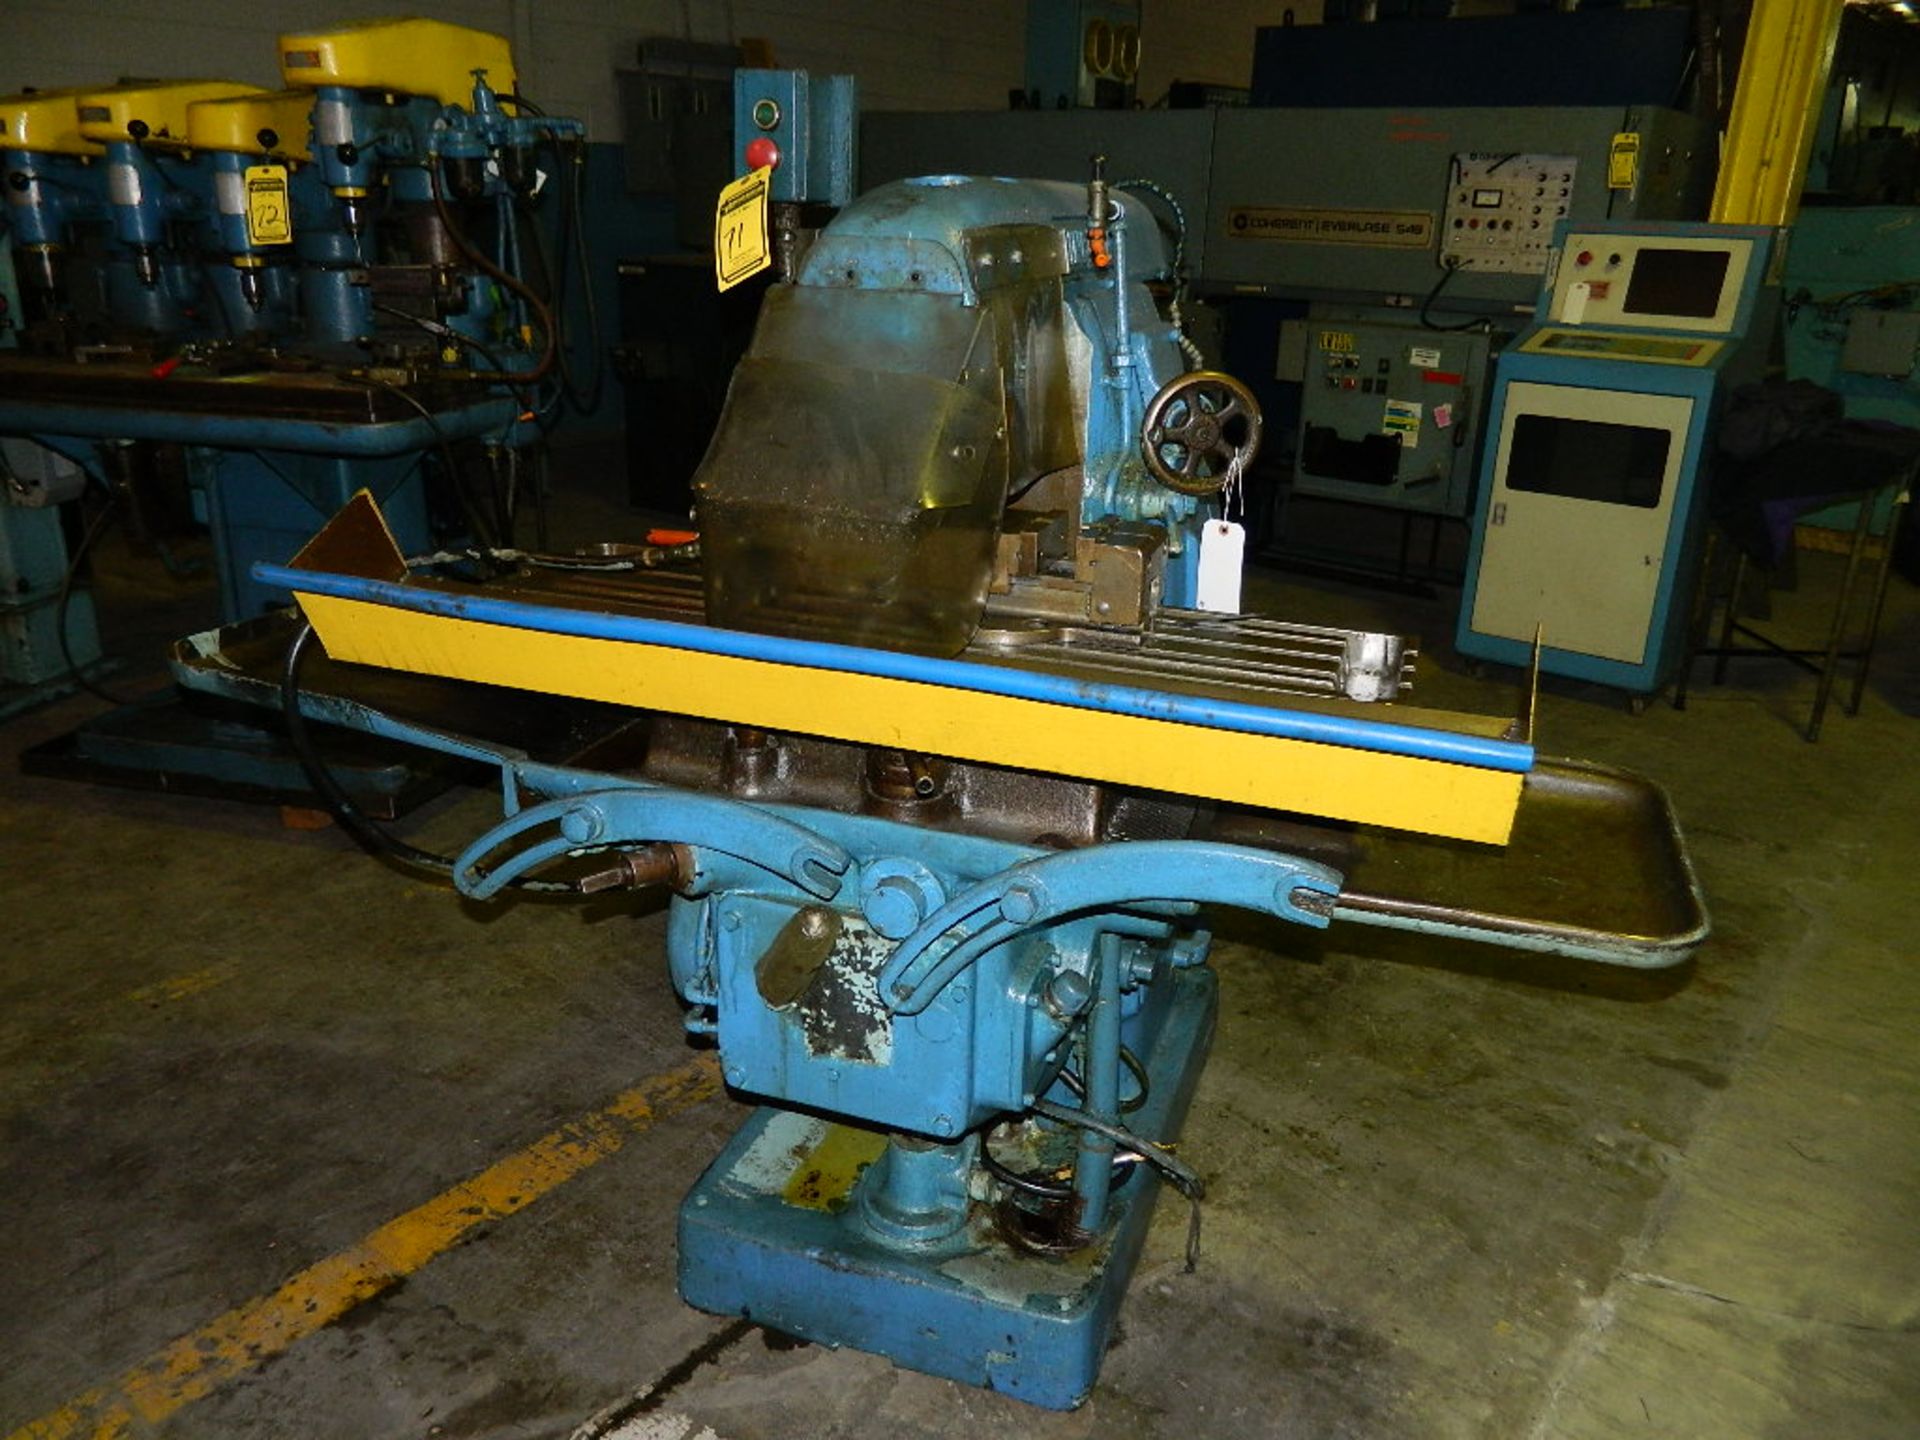 CINCINNATI HORIZONTAL MILL, 10'' X 41'' T-SLOT TABLE, 50-TAPER SPINDLE NOSE SUPPORT, 50-1500 RPM,